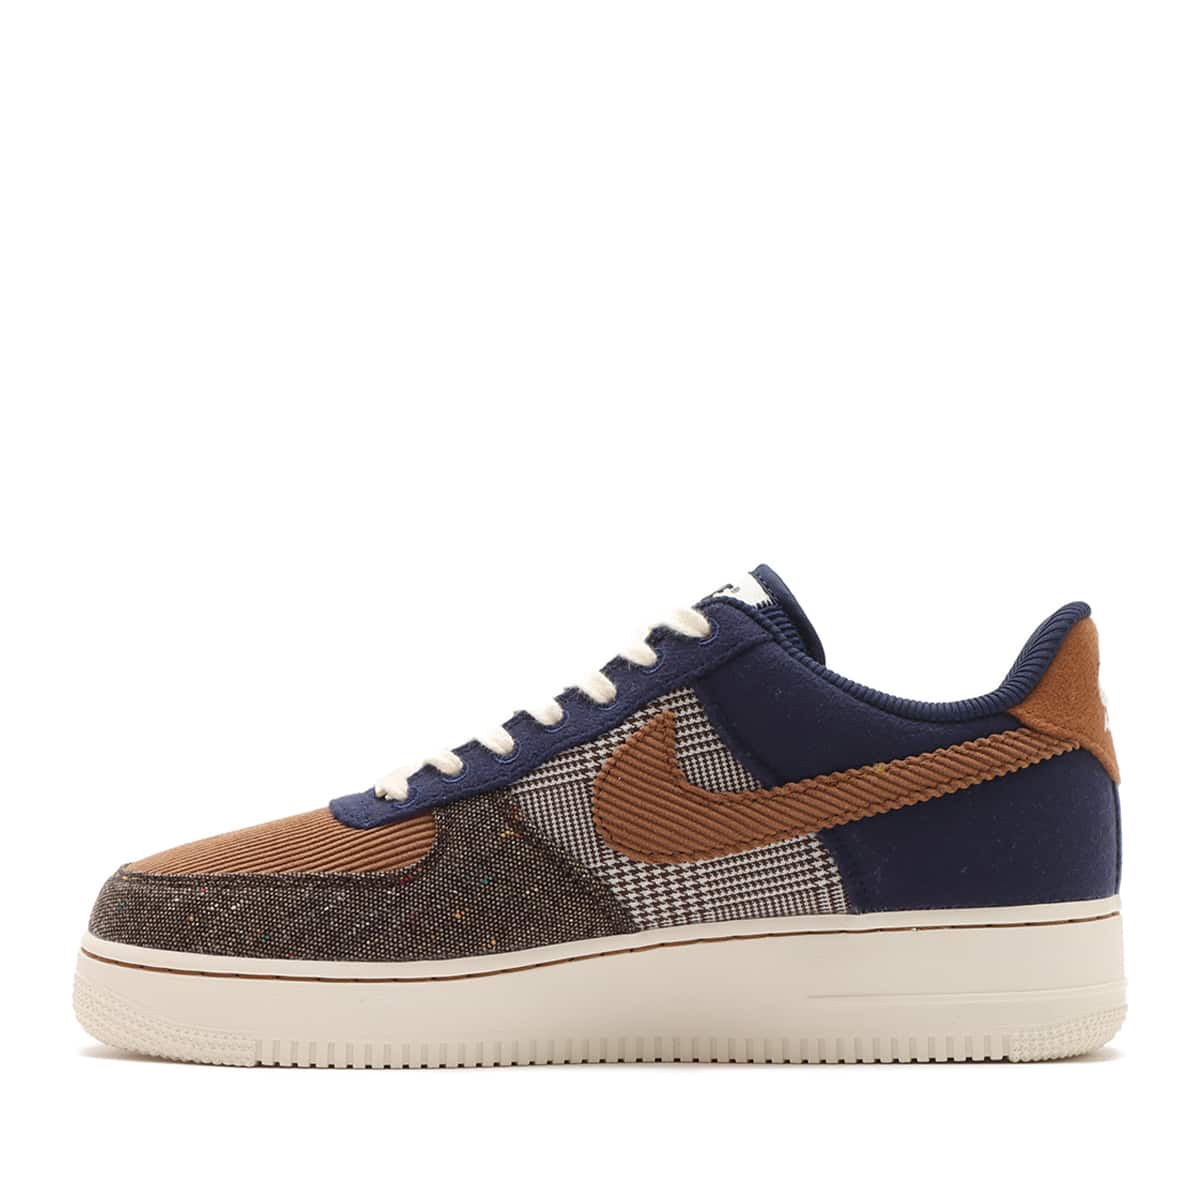 NIKE AIR FORCE 1 '07 PRM MIDNIGHT NAVY/ALE BROWN-PALE IVORY